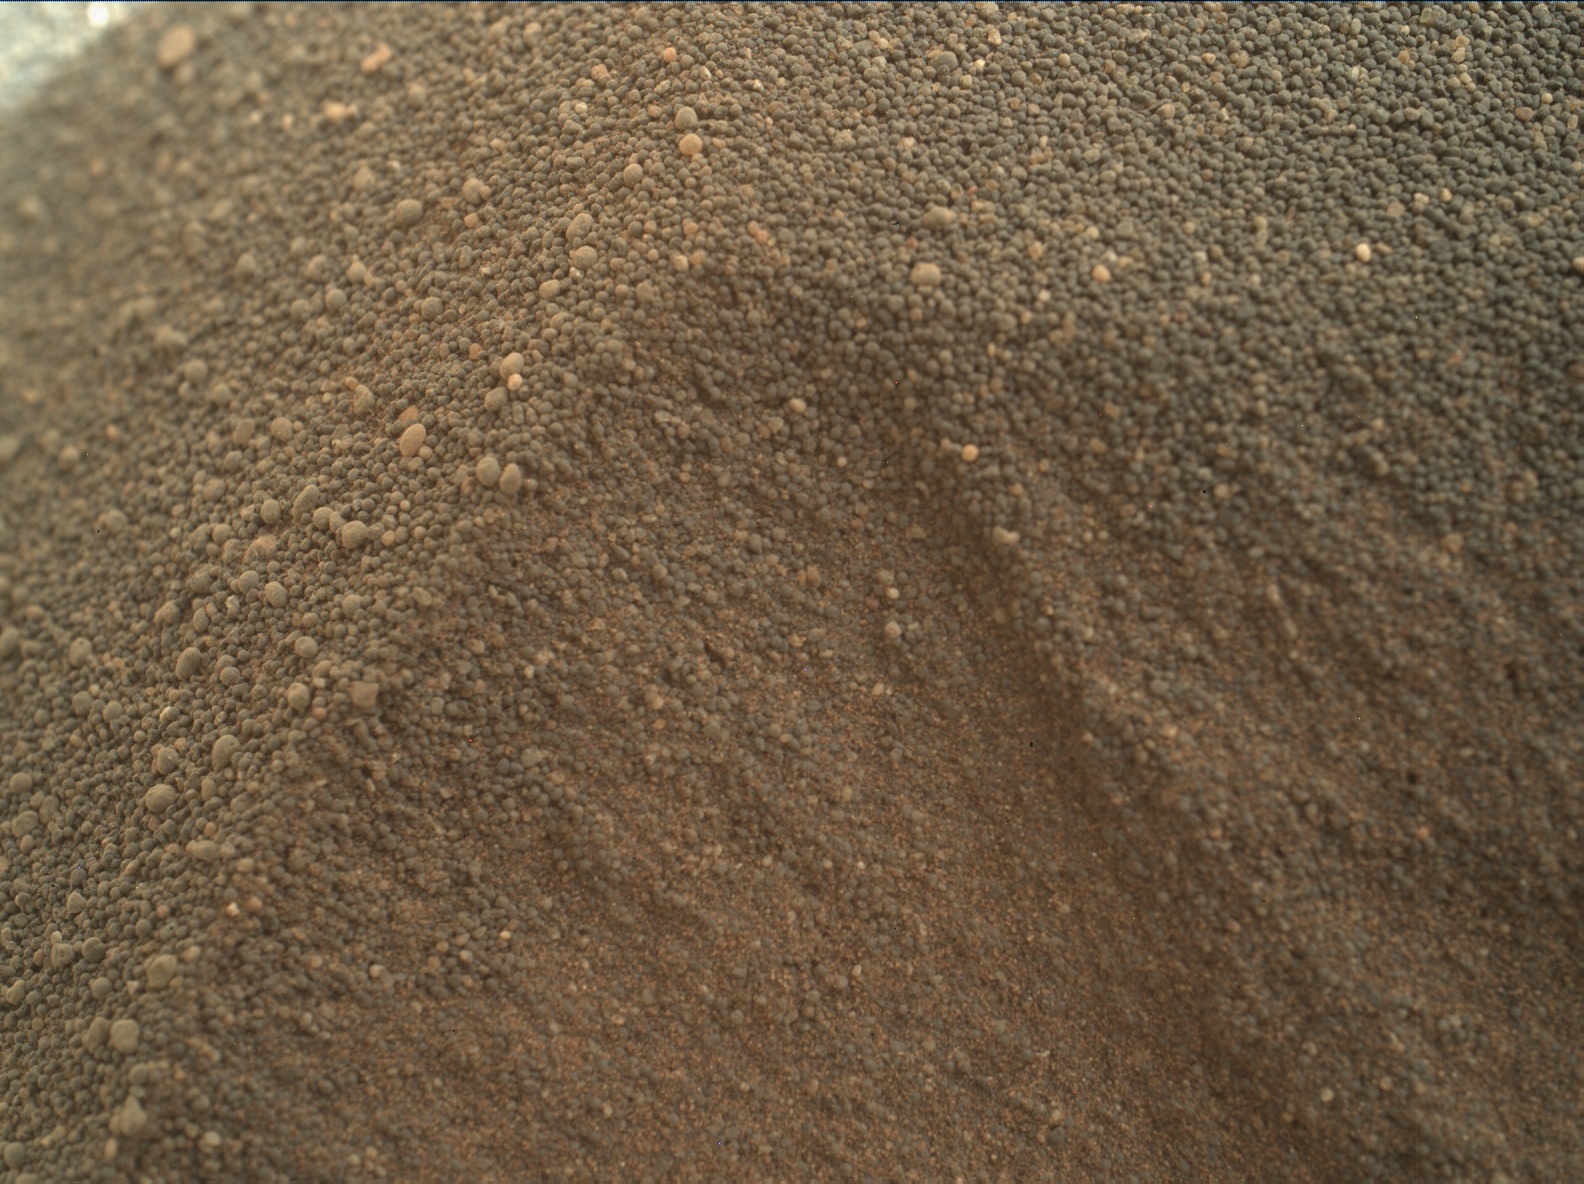 Nasa's Mars rover Curiosity acquired this image using its Mars Hand Lens Imager (MAHLI) on Sol 1749